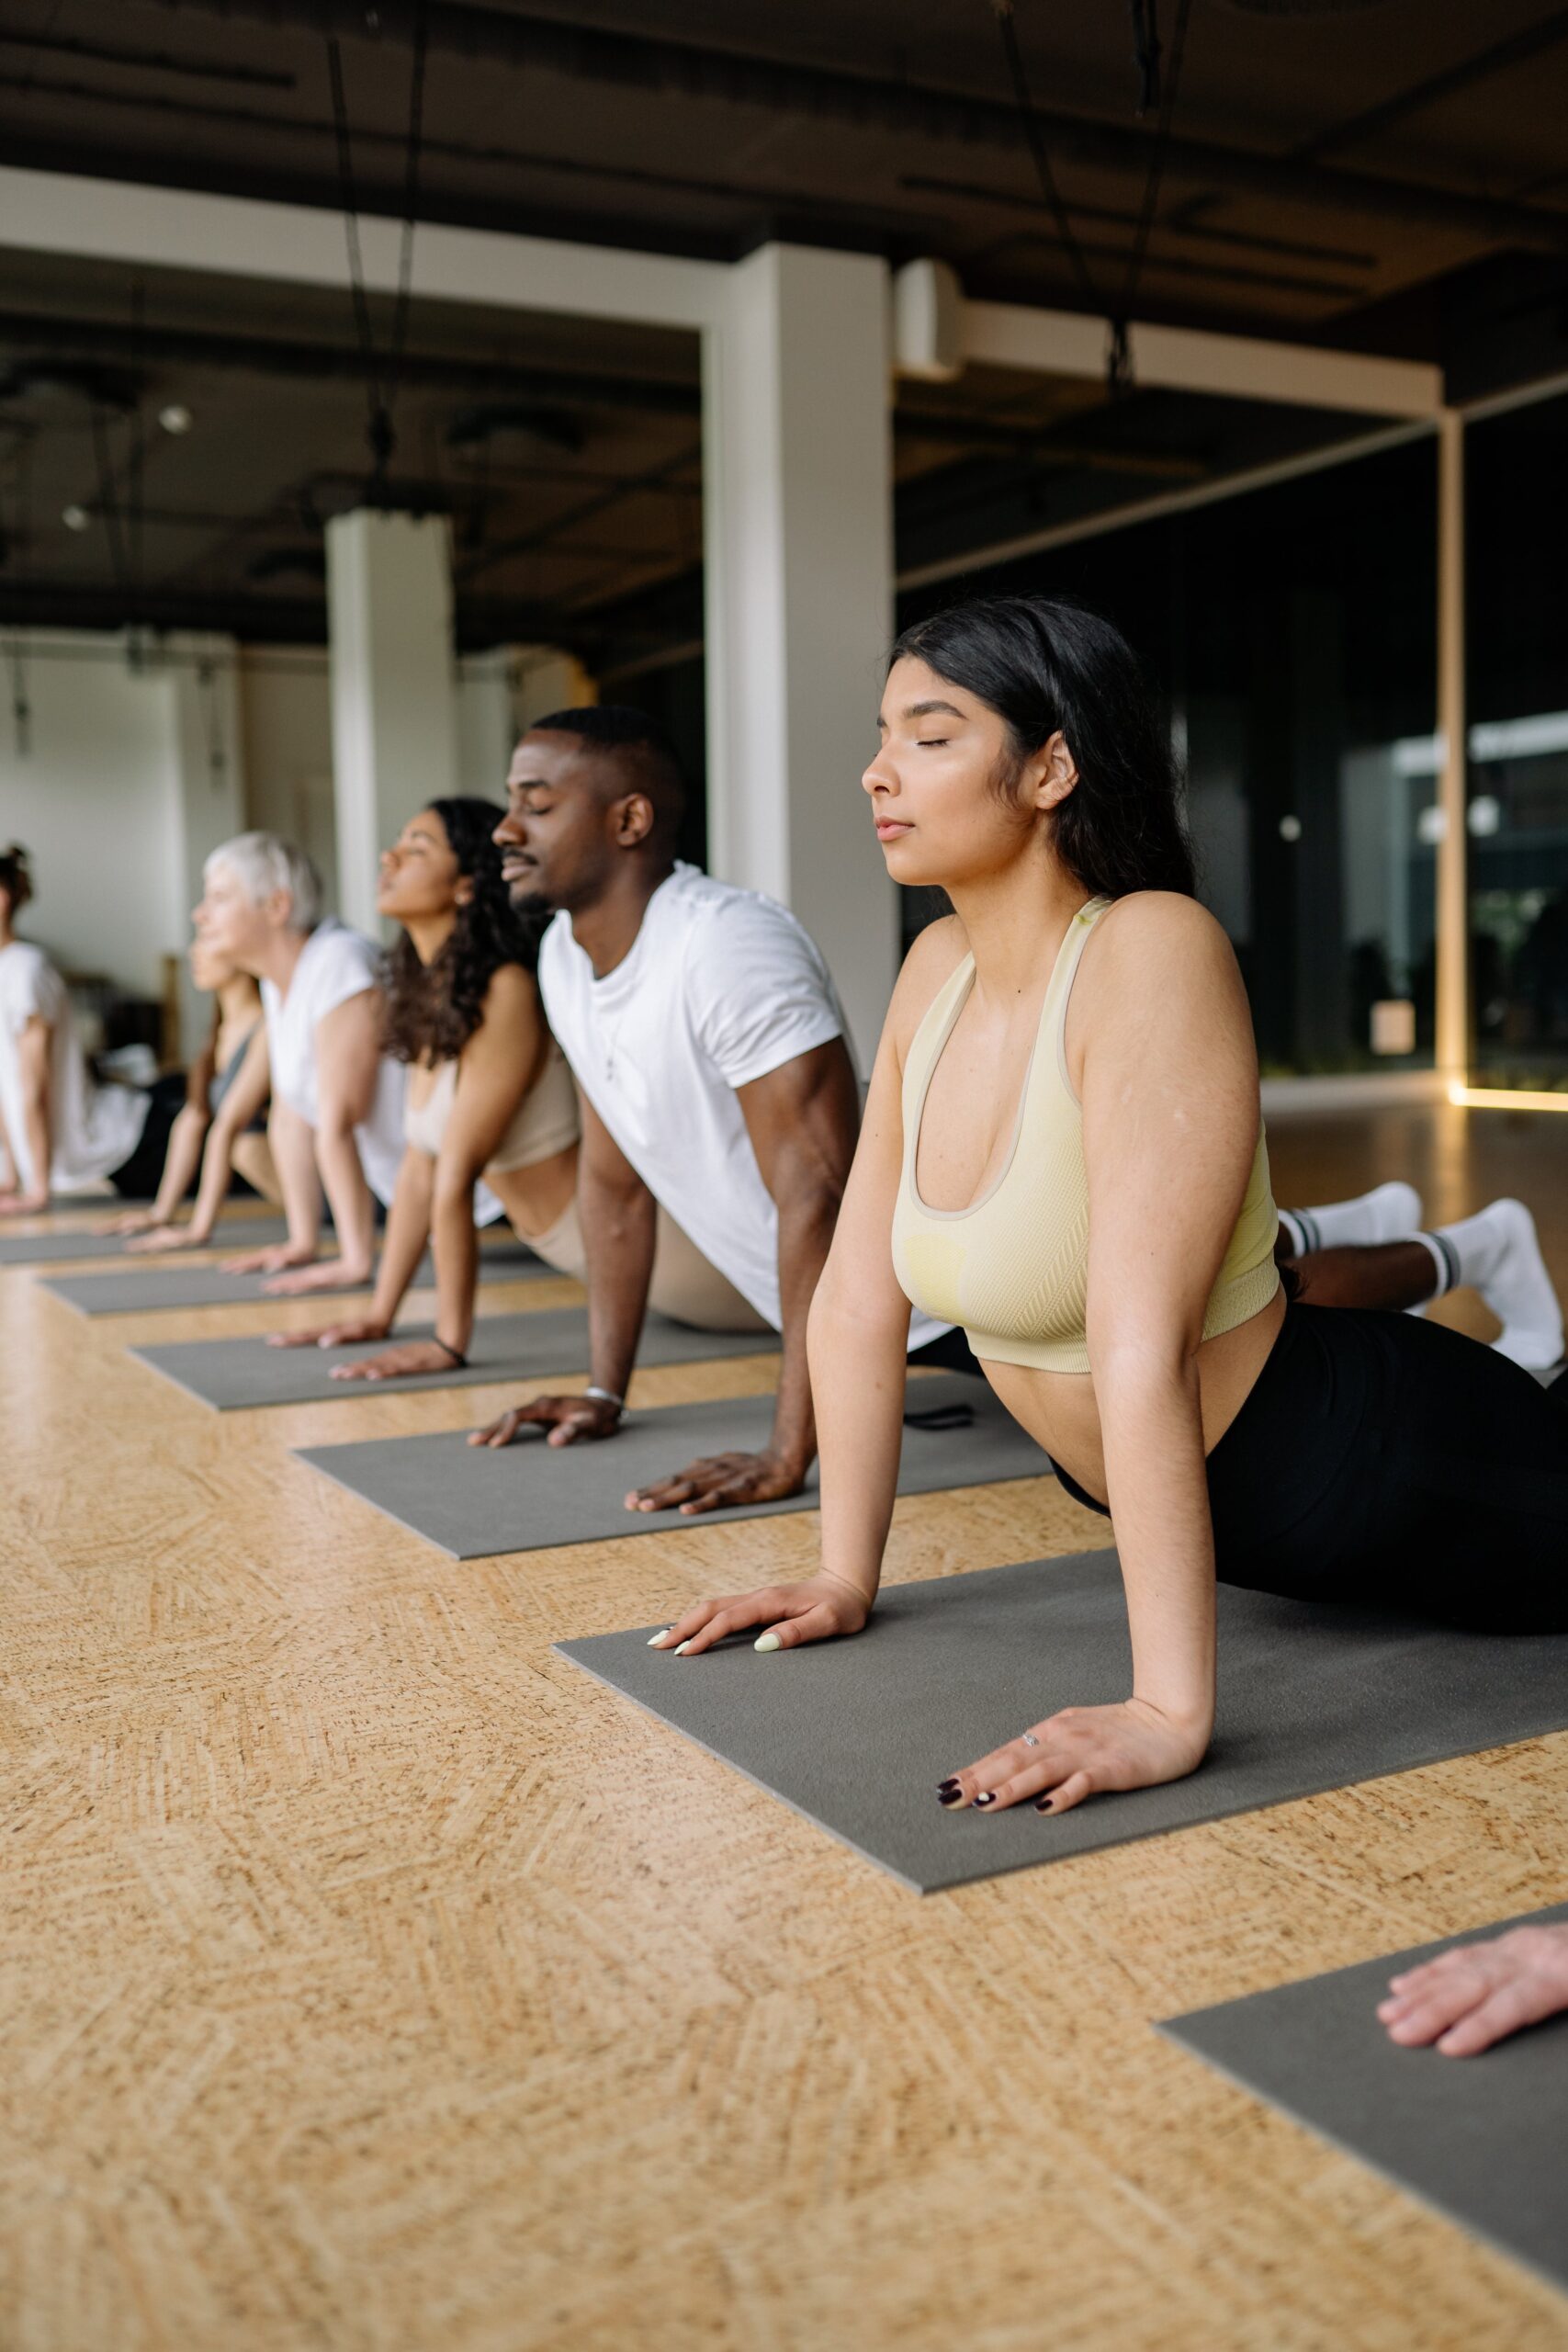 This post is about releasing your stress at these yoga studios in Vancouver.